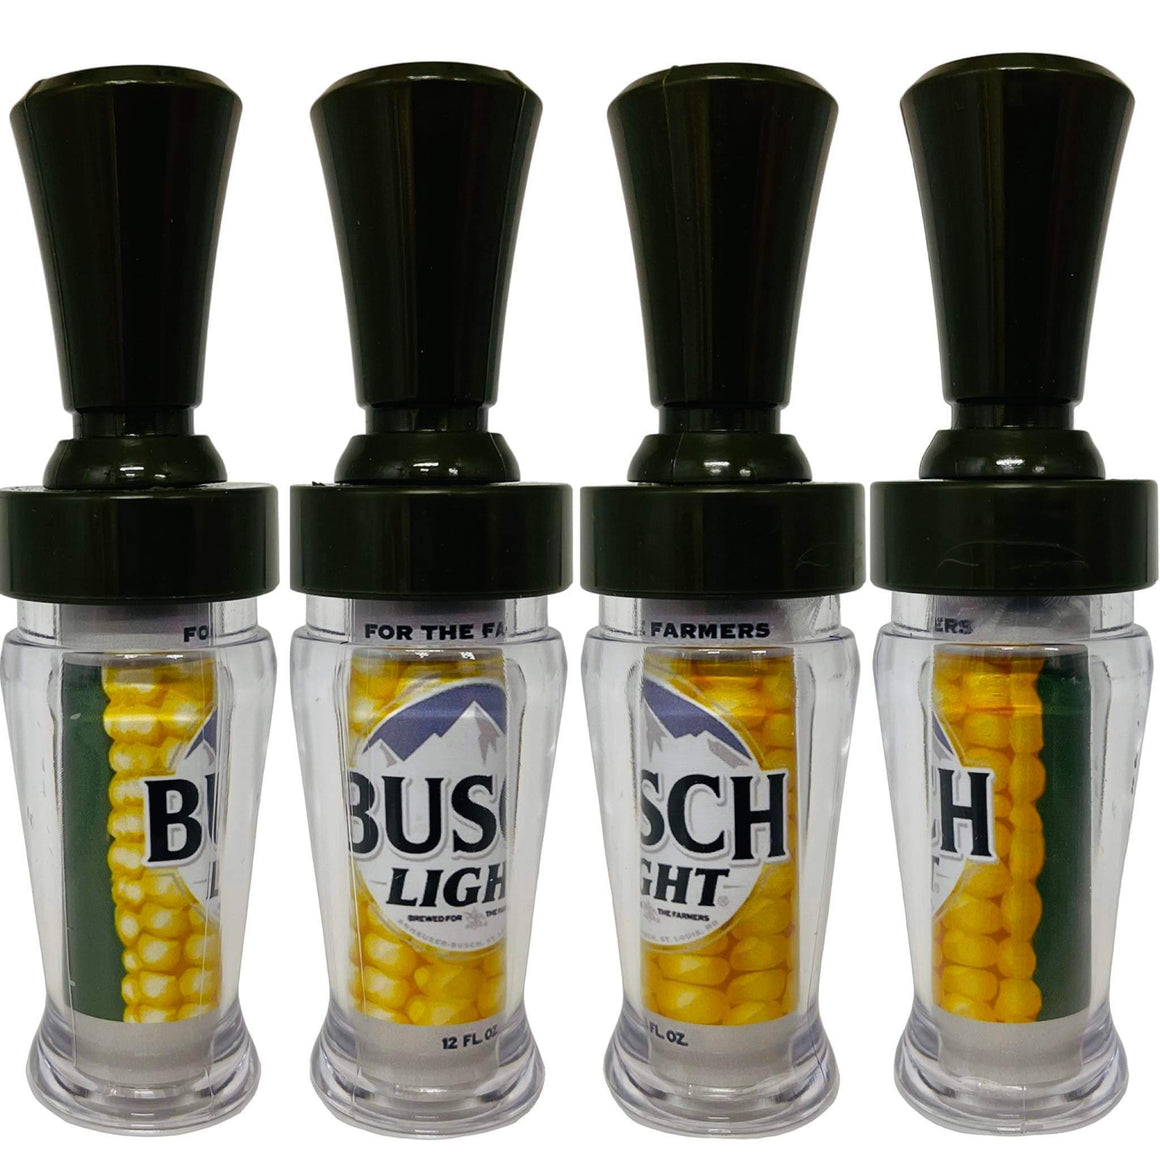 POLYCARBONATE IMAGE DUCK CALL BUSCH LIGHT CORN CAN